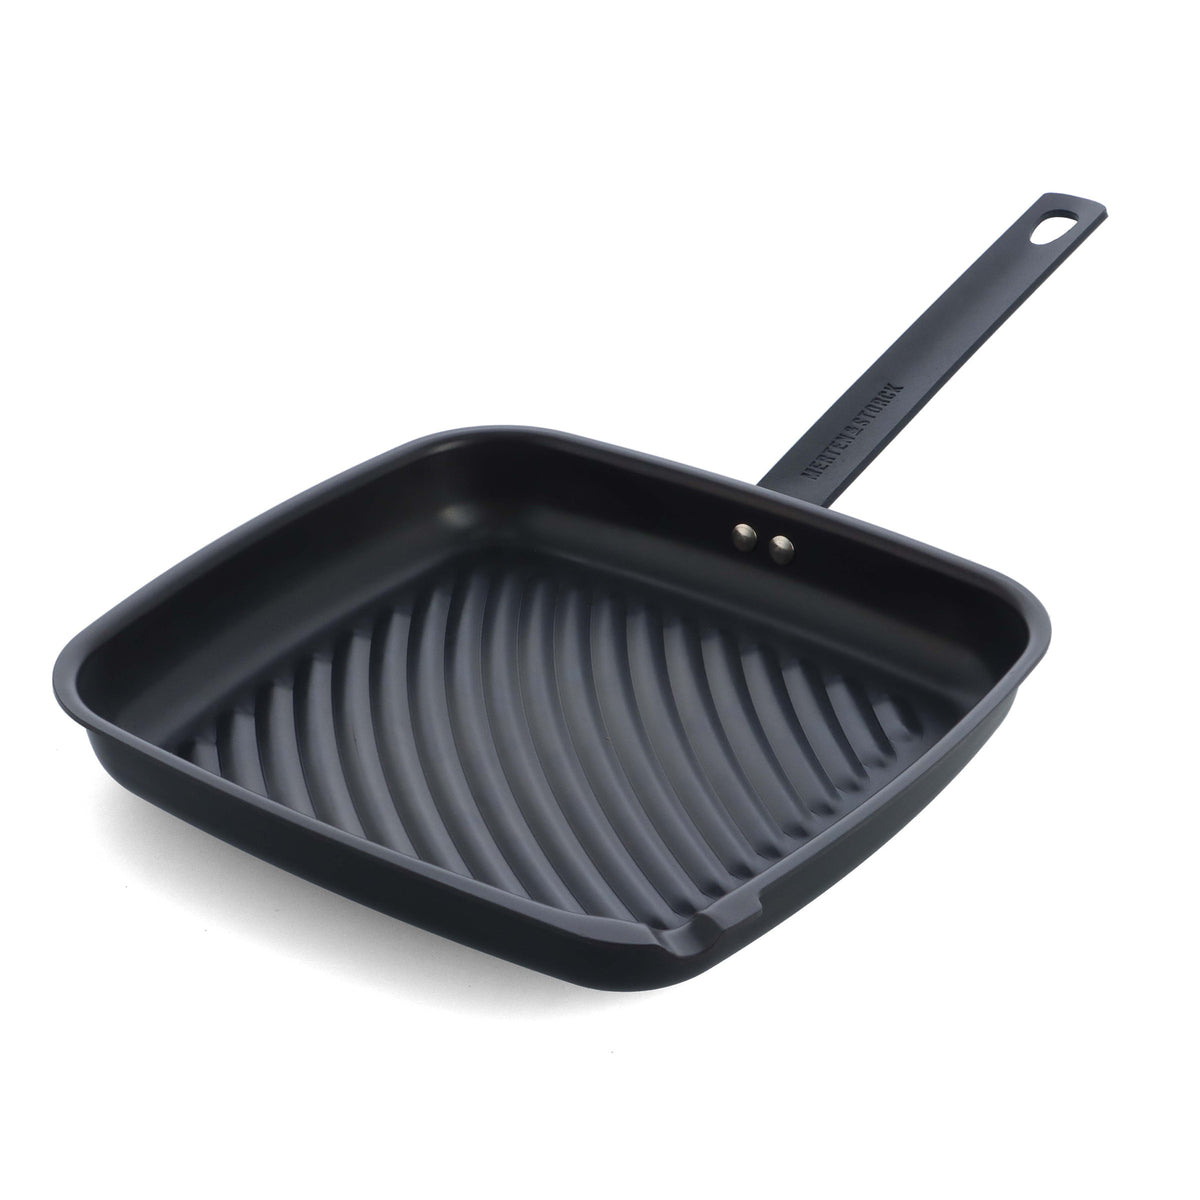 grill pan on a white background.